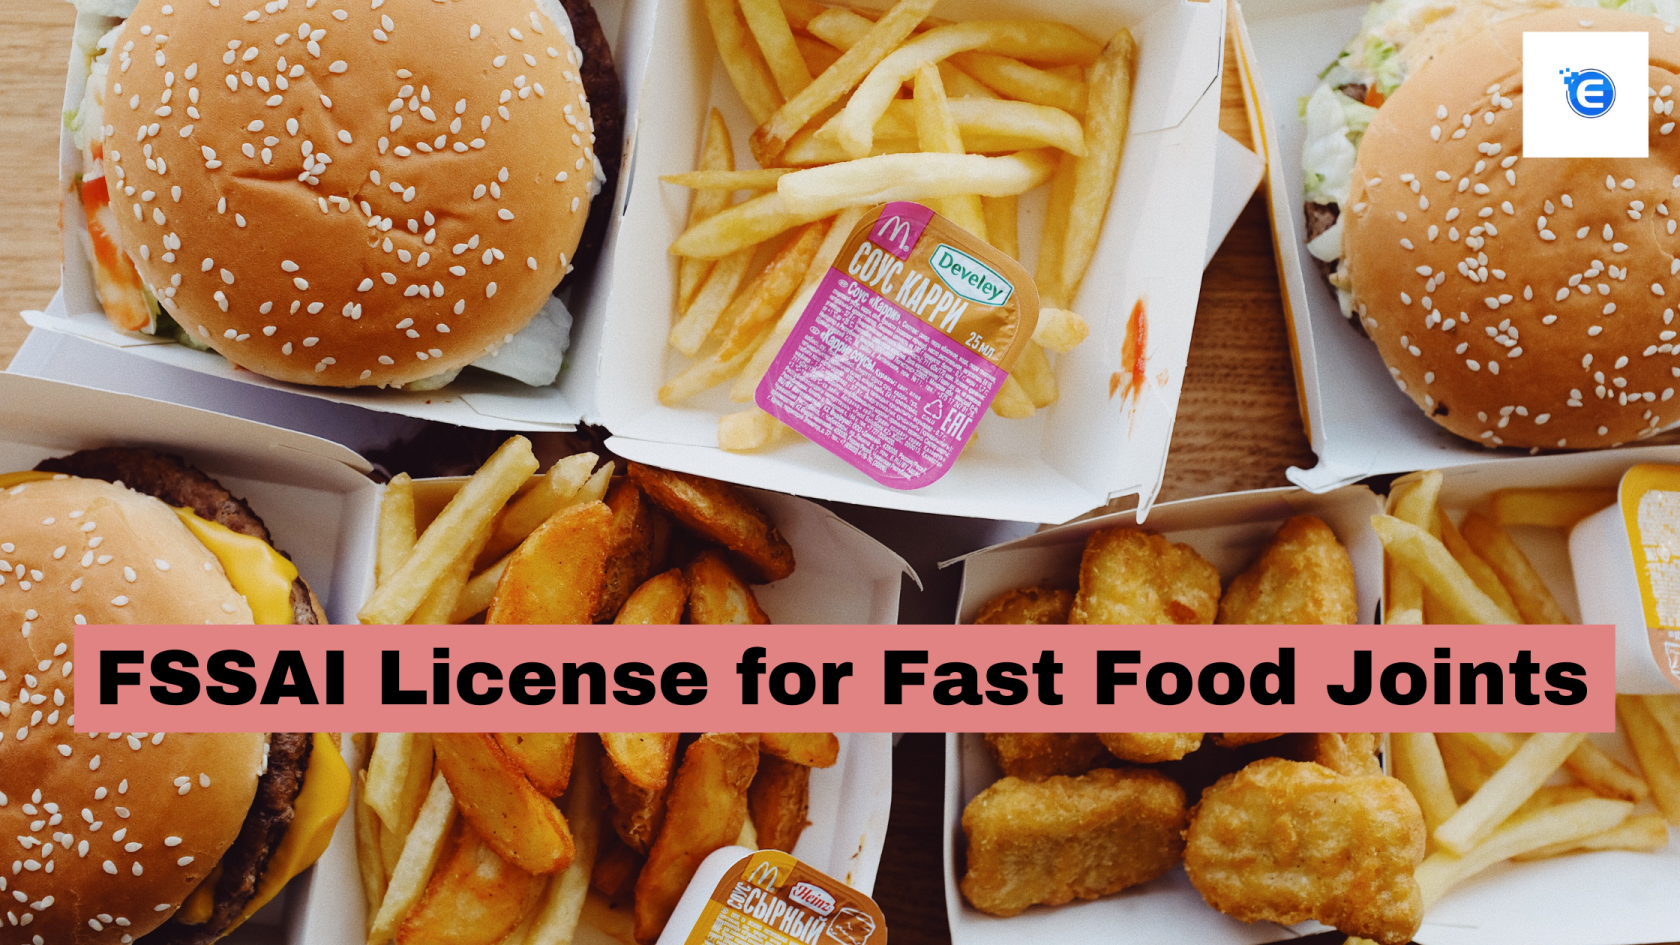 FSSAI License for Fast Food Joints